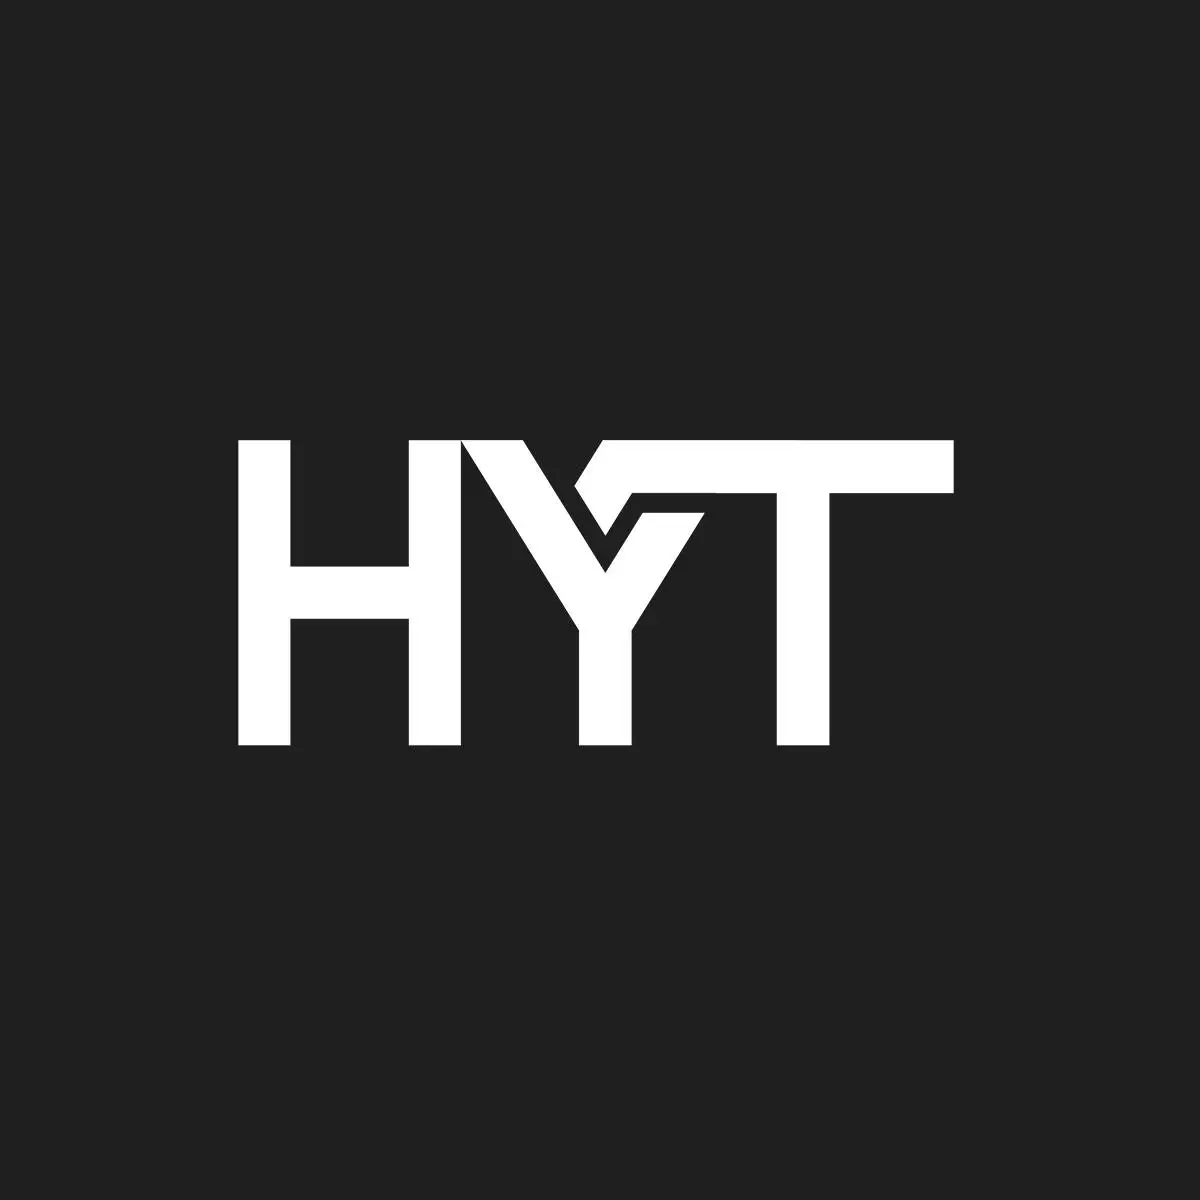 Marketing for real estate company in Egypt – HYT